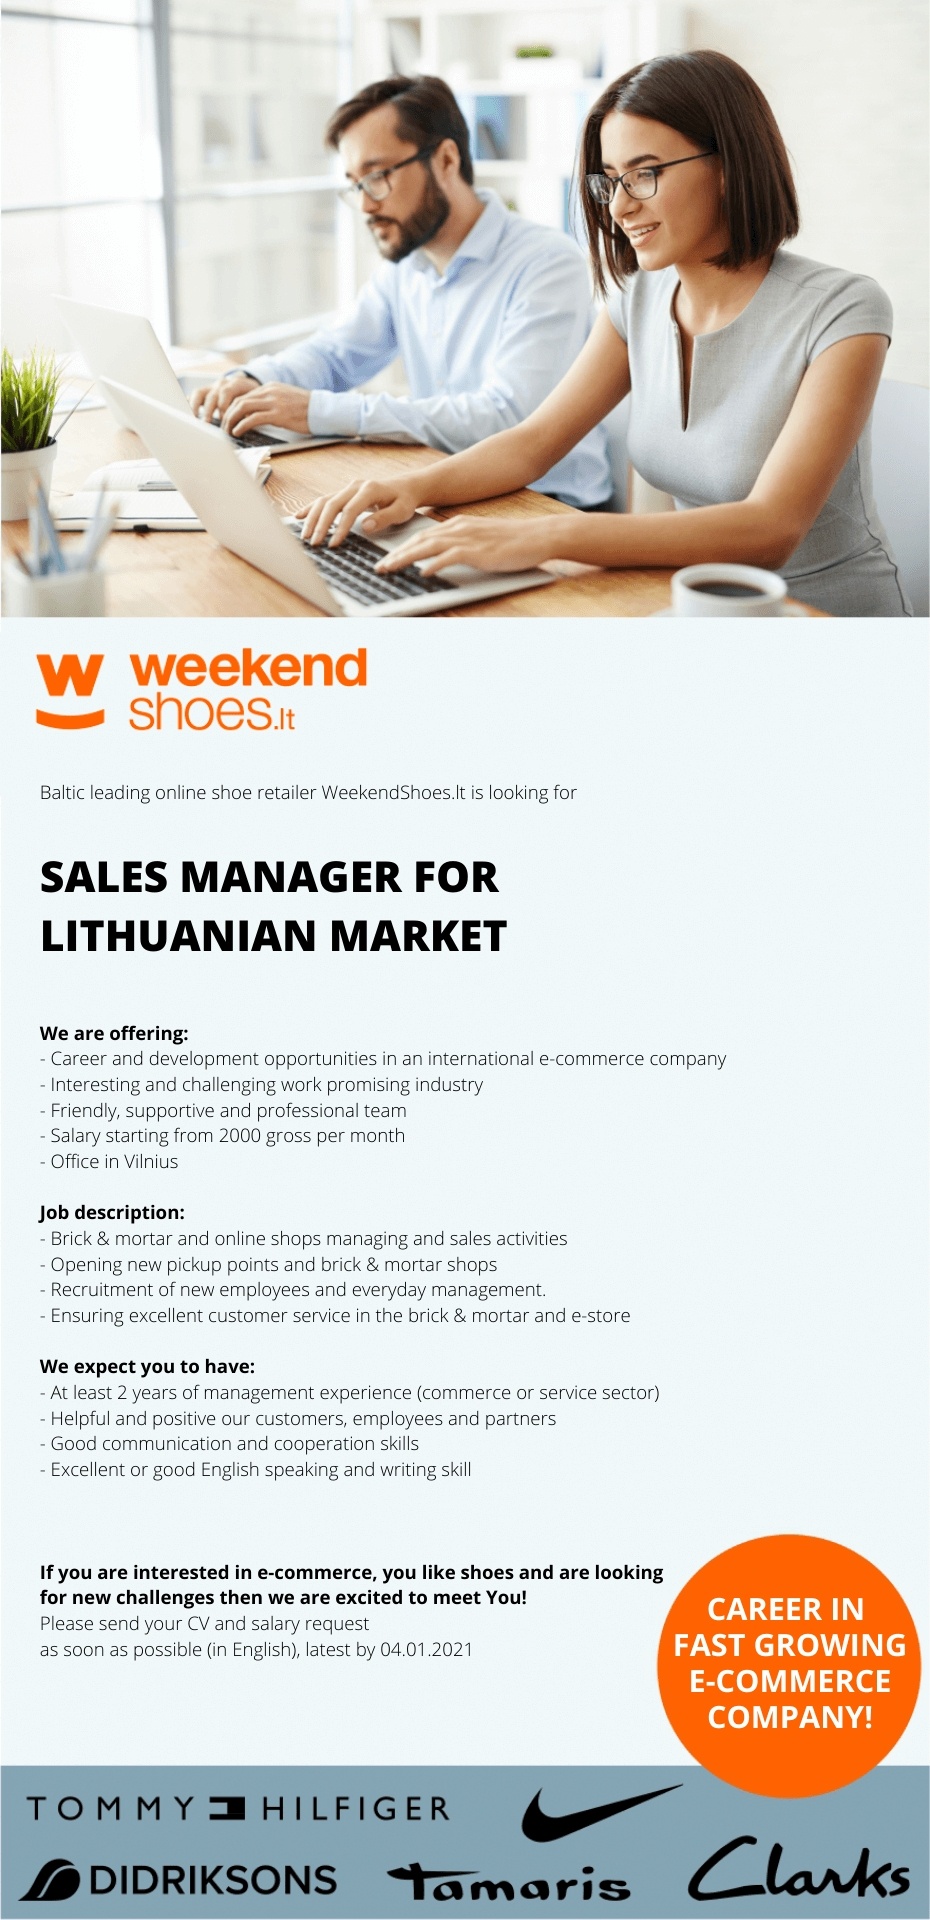 WeekendShoes.lt SALES MANAGER FOR LITHUANIAN MARKET - career & development opportunities